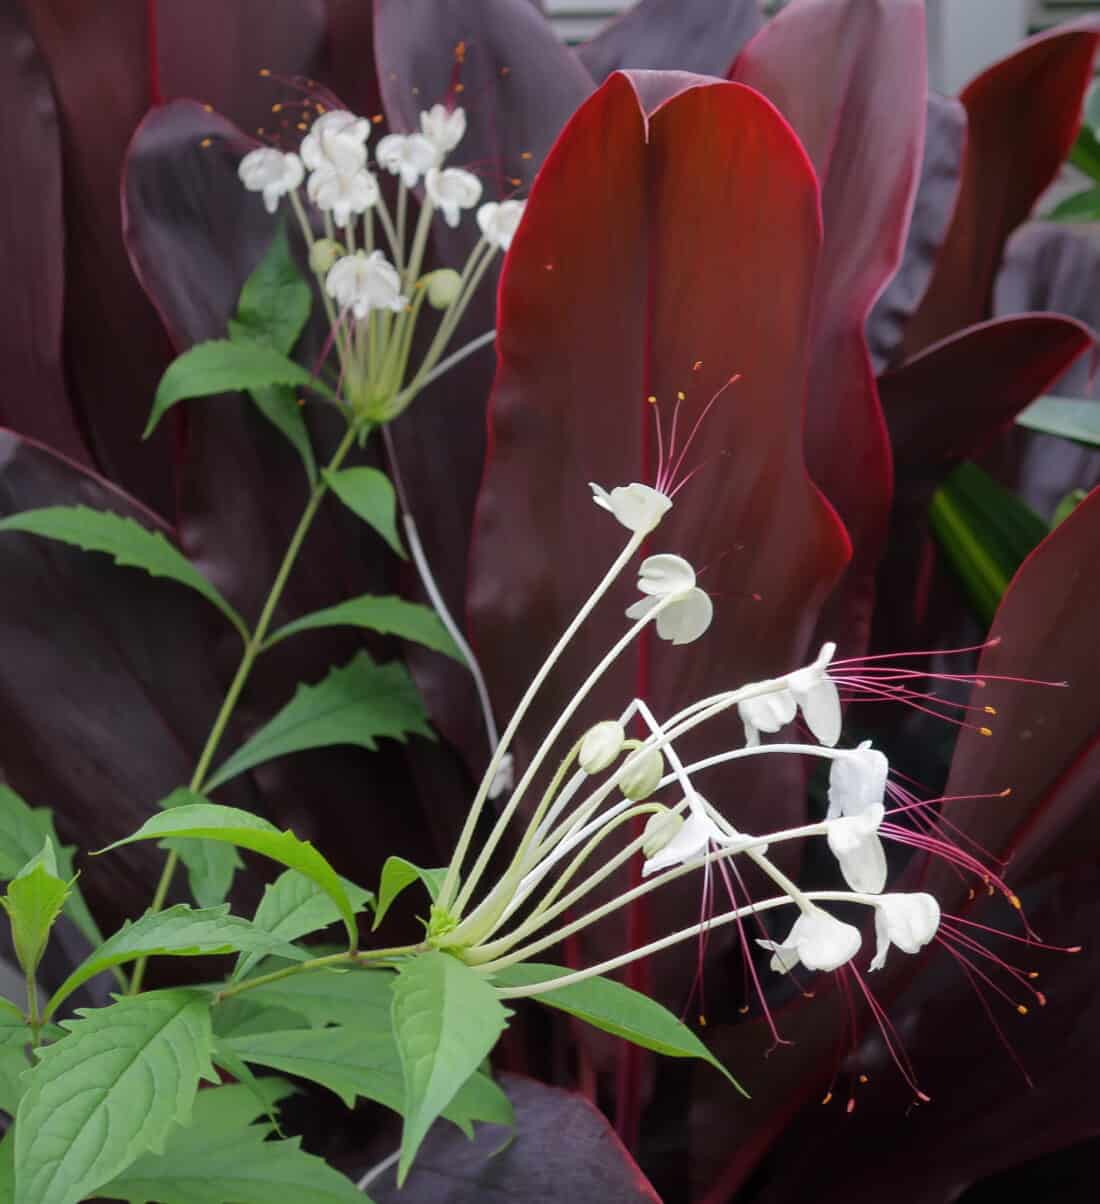 black and white plant combination
Clerodendrum incisum var macrosiphon (Musical Notes Plant) and Cordyline fruticosa 'Black Magic' 